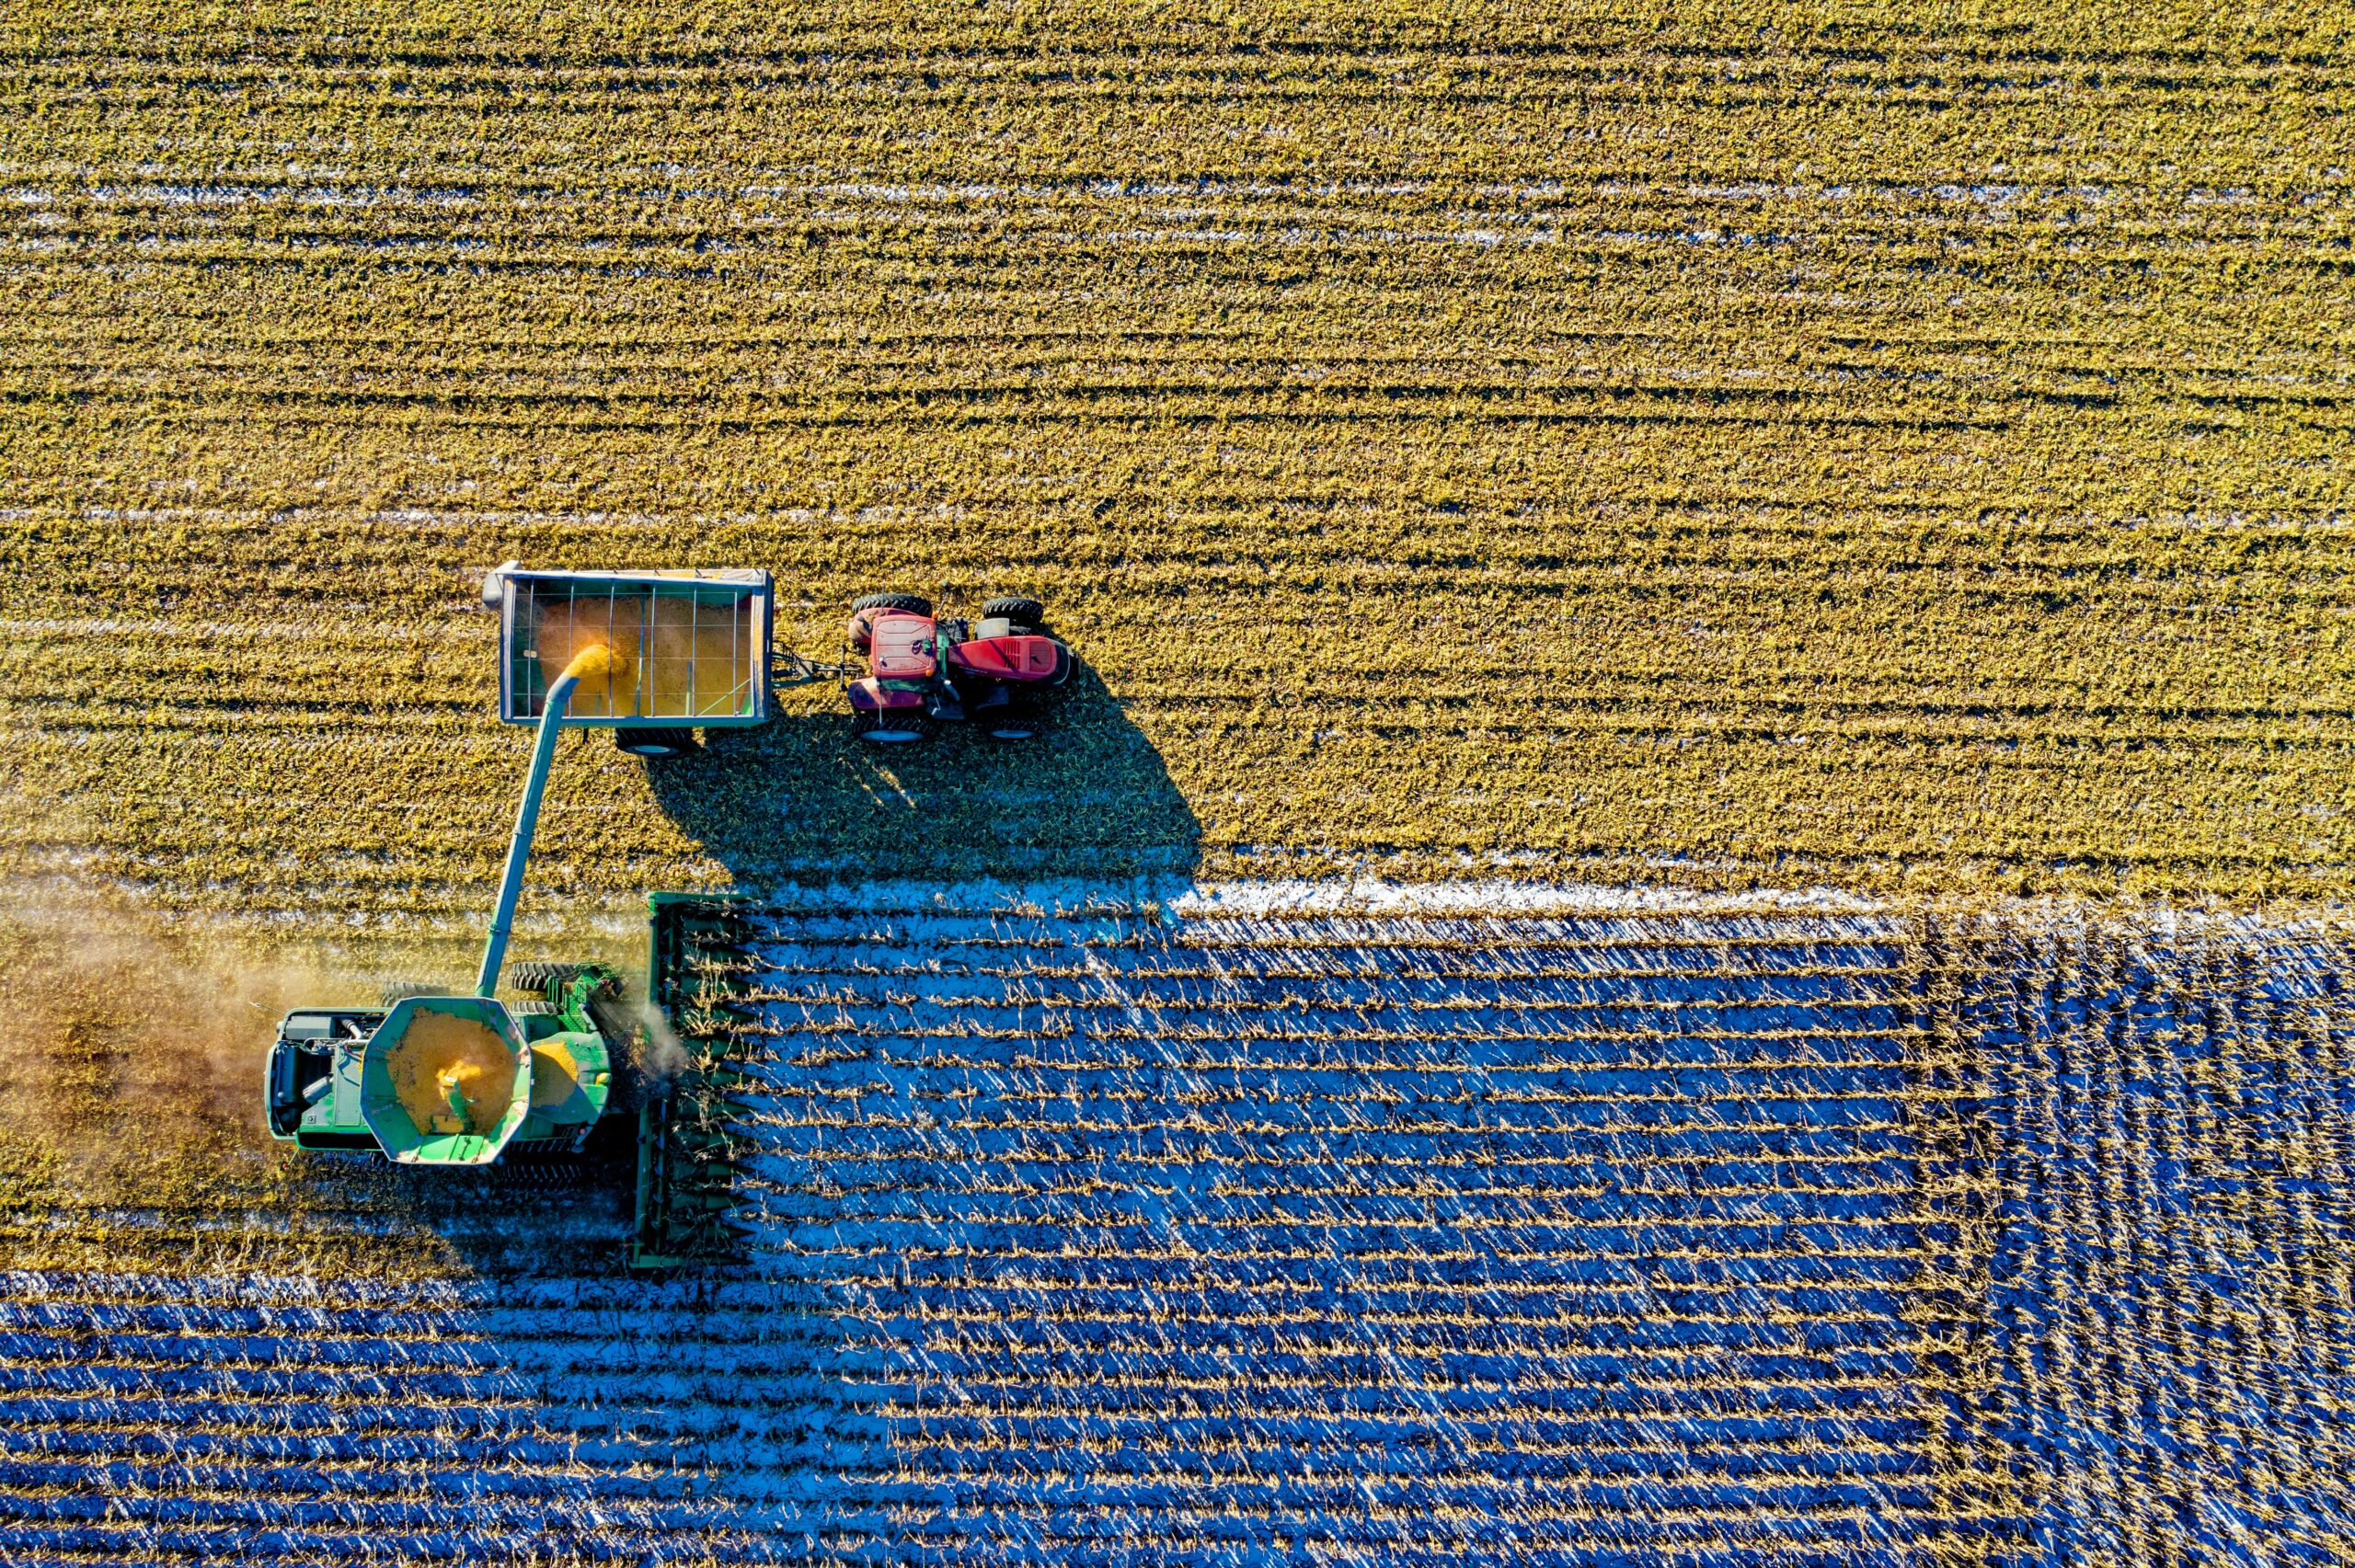 Photo uploaded by Tom Fisk, from Pexels.  https://www.pexels.com/photo/top-view-of-green-field-1595104/